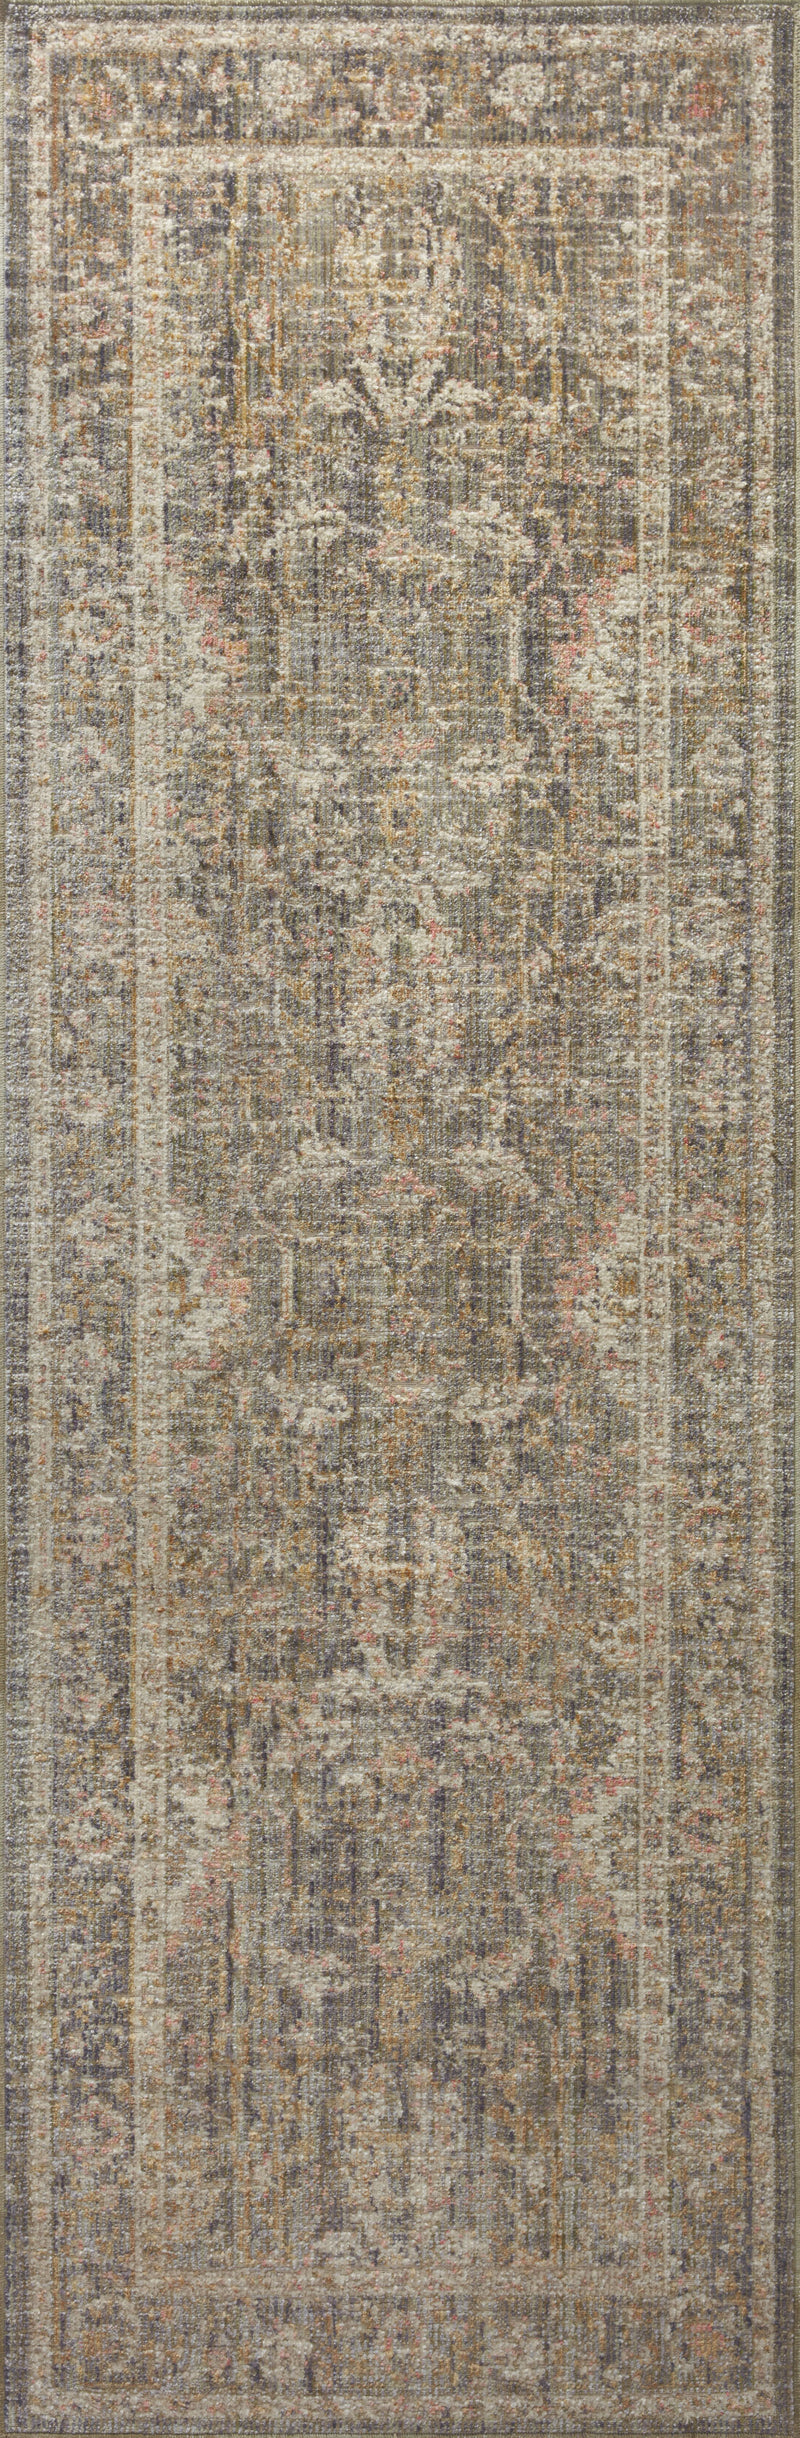 ROSEMARIE Collection Rug  in  SAGE / BLUSH Green Accent Power-Loomed Viscose